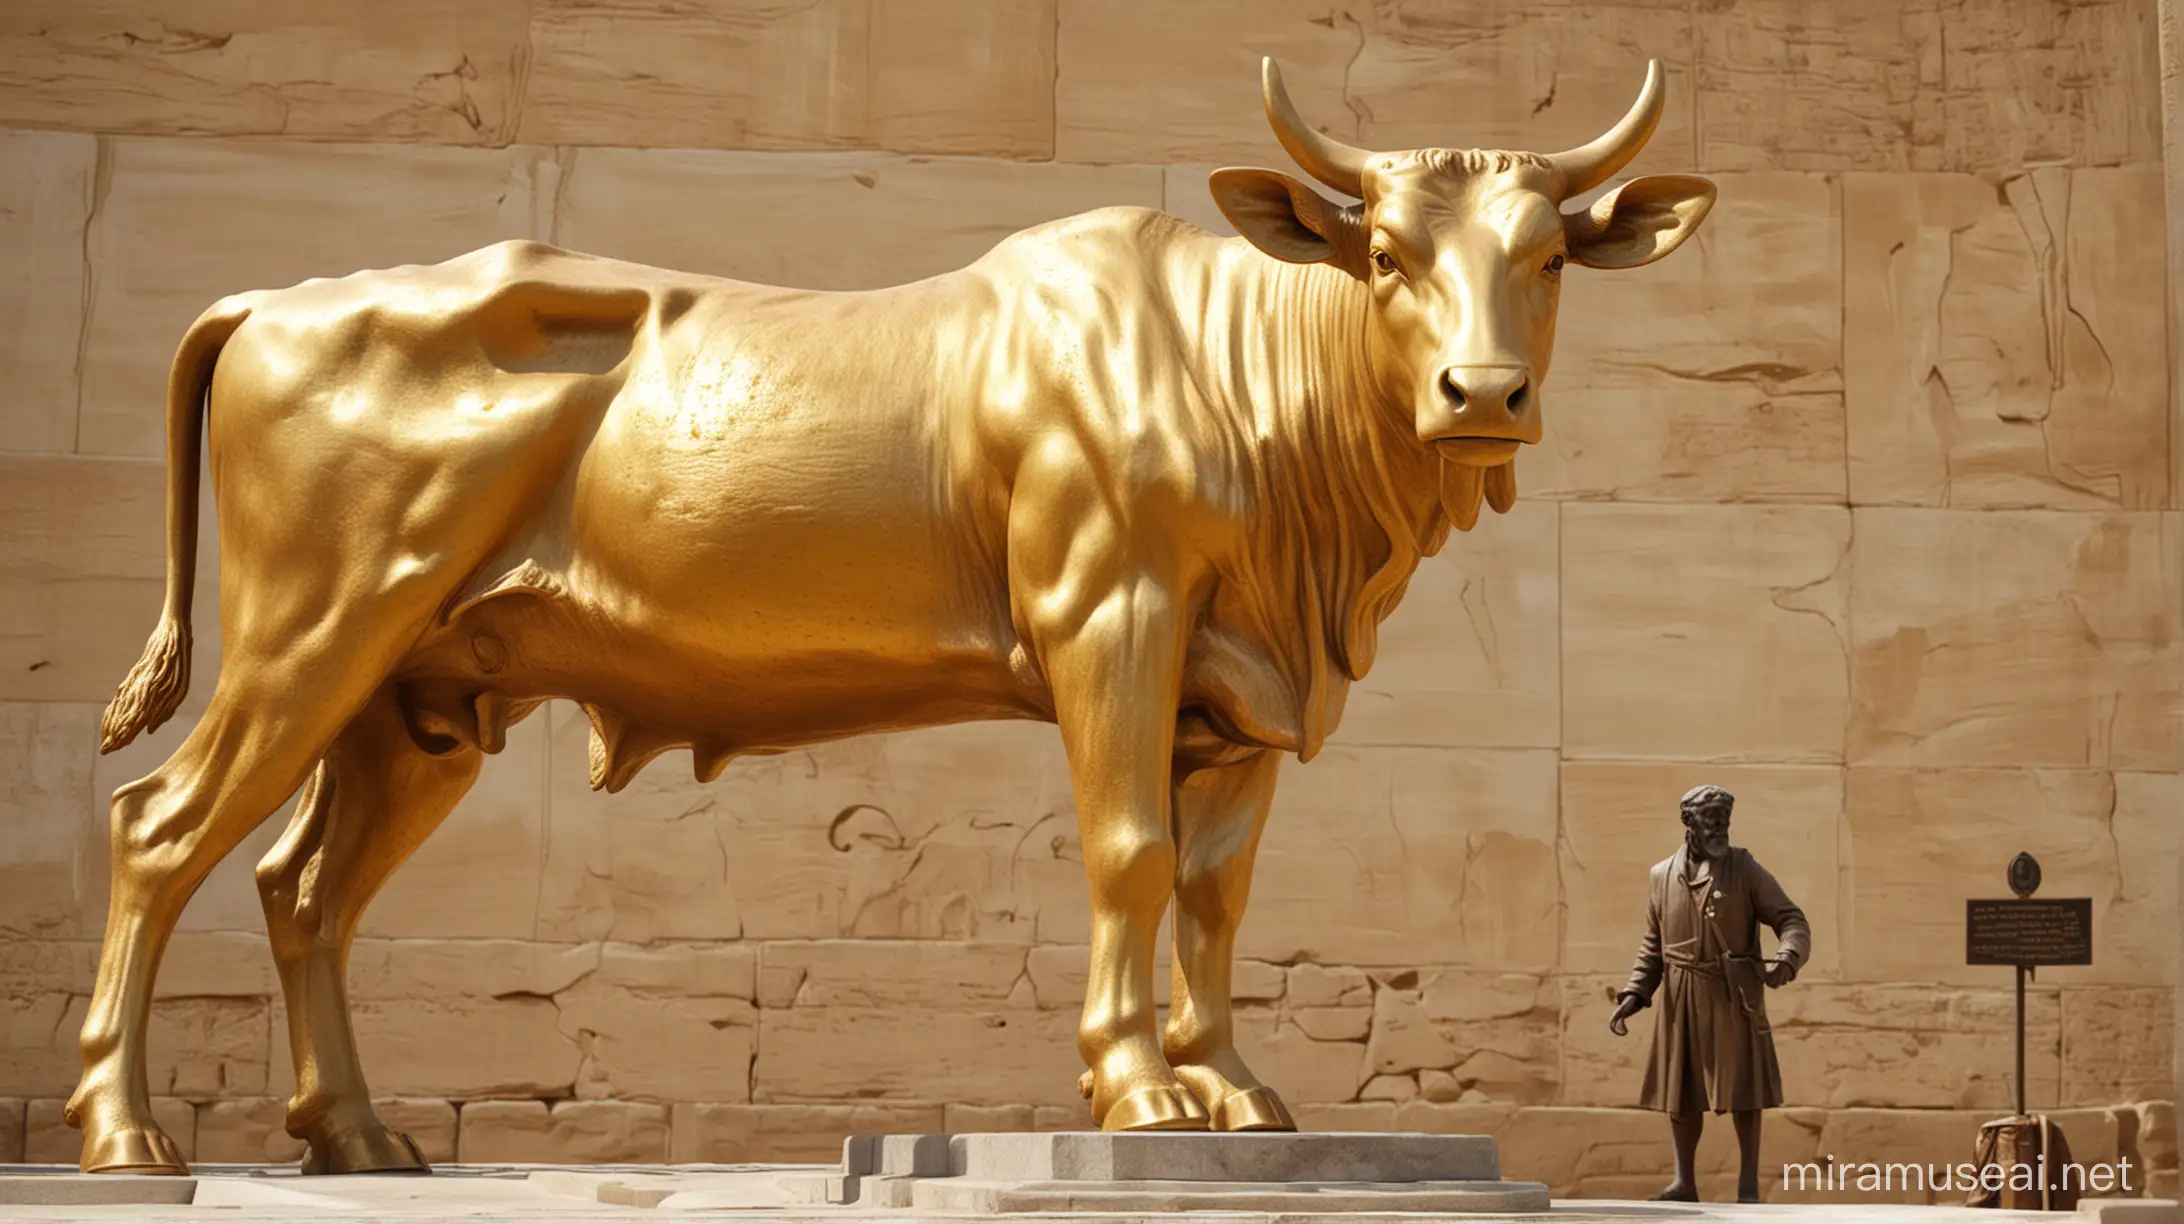 A statue of a golden calf. In  the era of Moses